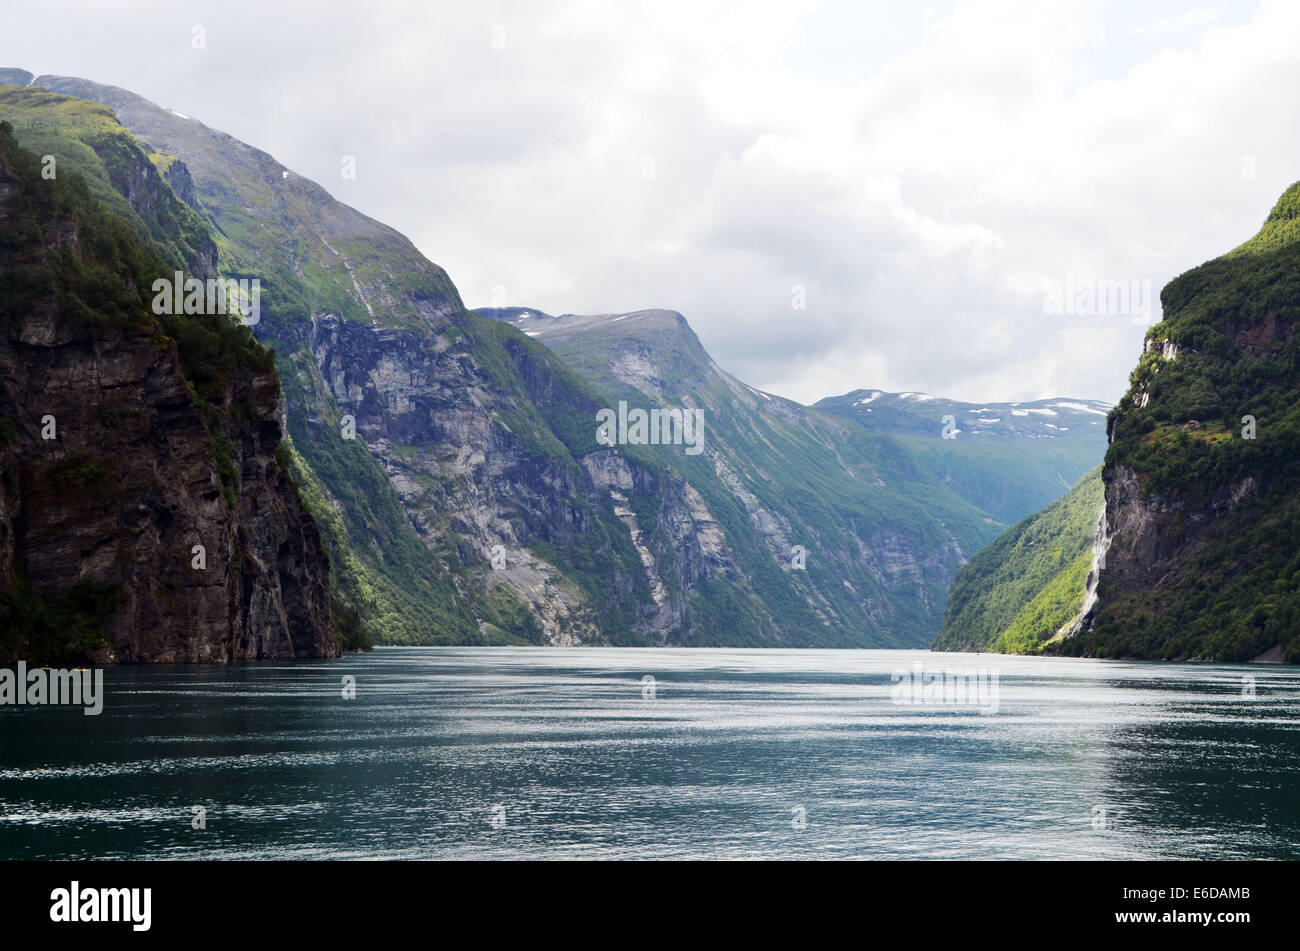 Geiranger fjord in southern Norway is one of the most beautiful fjords. The sheer cliffs rise straight from the water, . Stock Photo